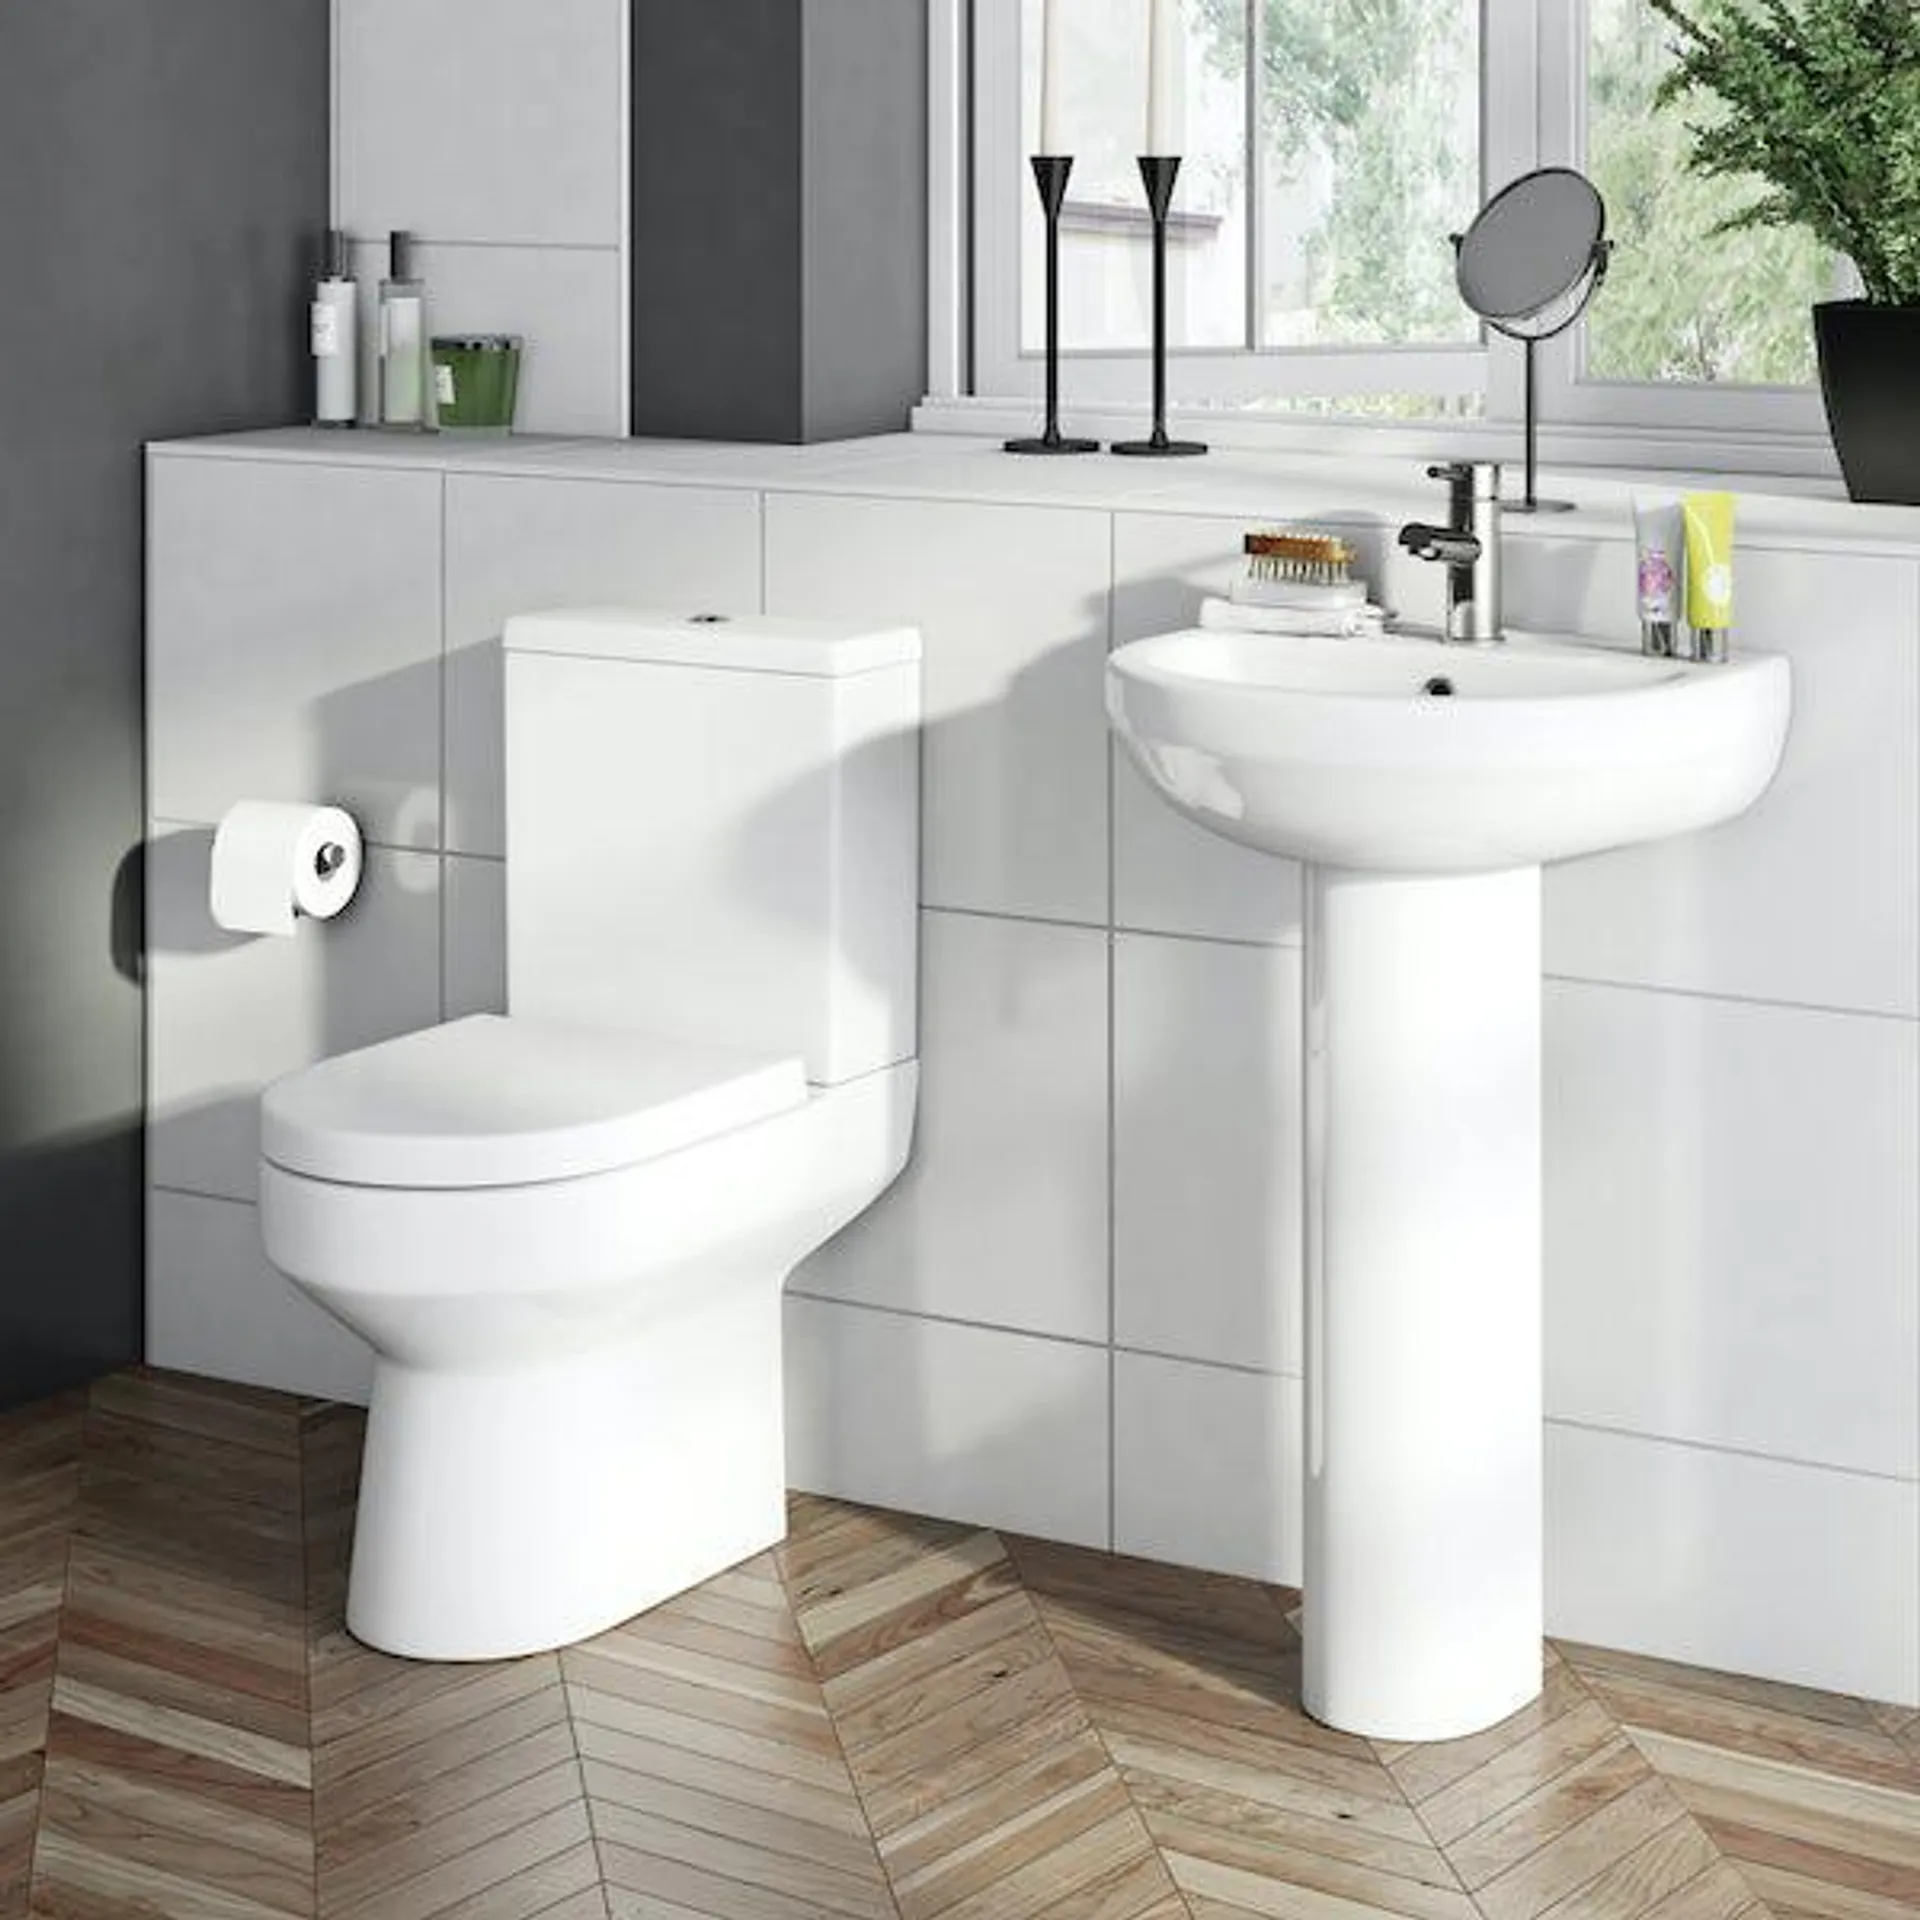 Orchard Wharfe cloakroom suite with full pedestal basin 500mm